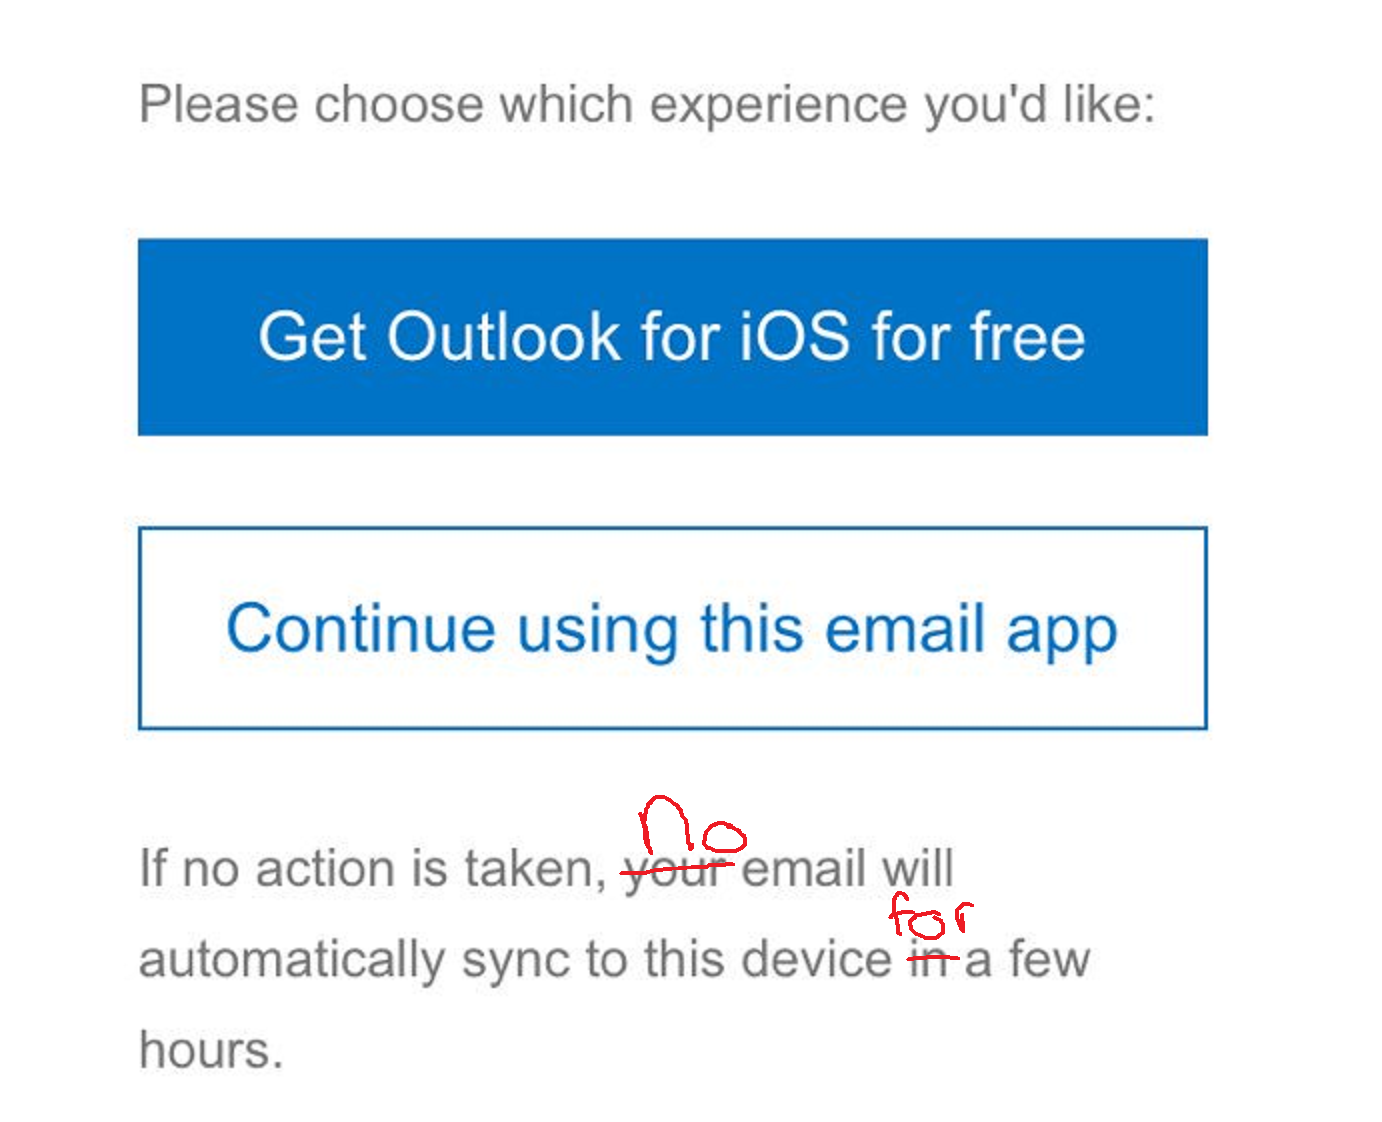 Microsoft is using dark patterns to pressure Outlook.com users into using the Outlook mobile apps